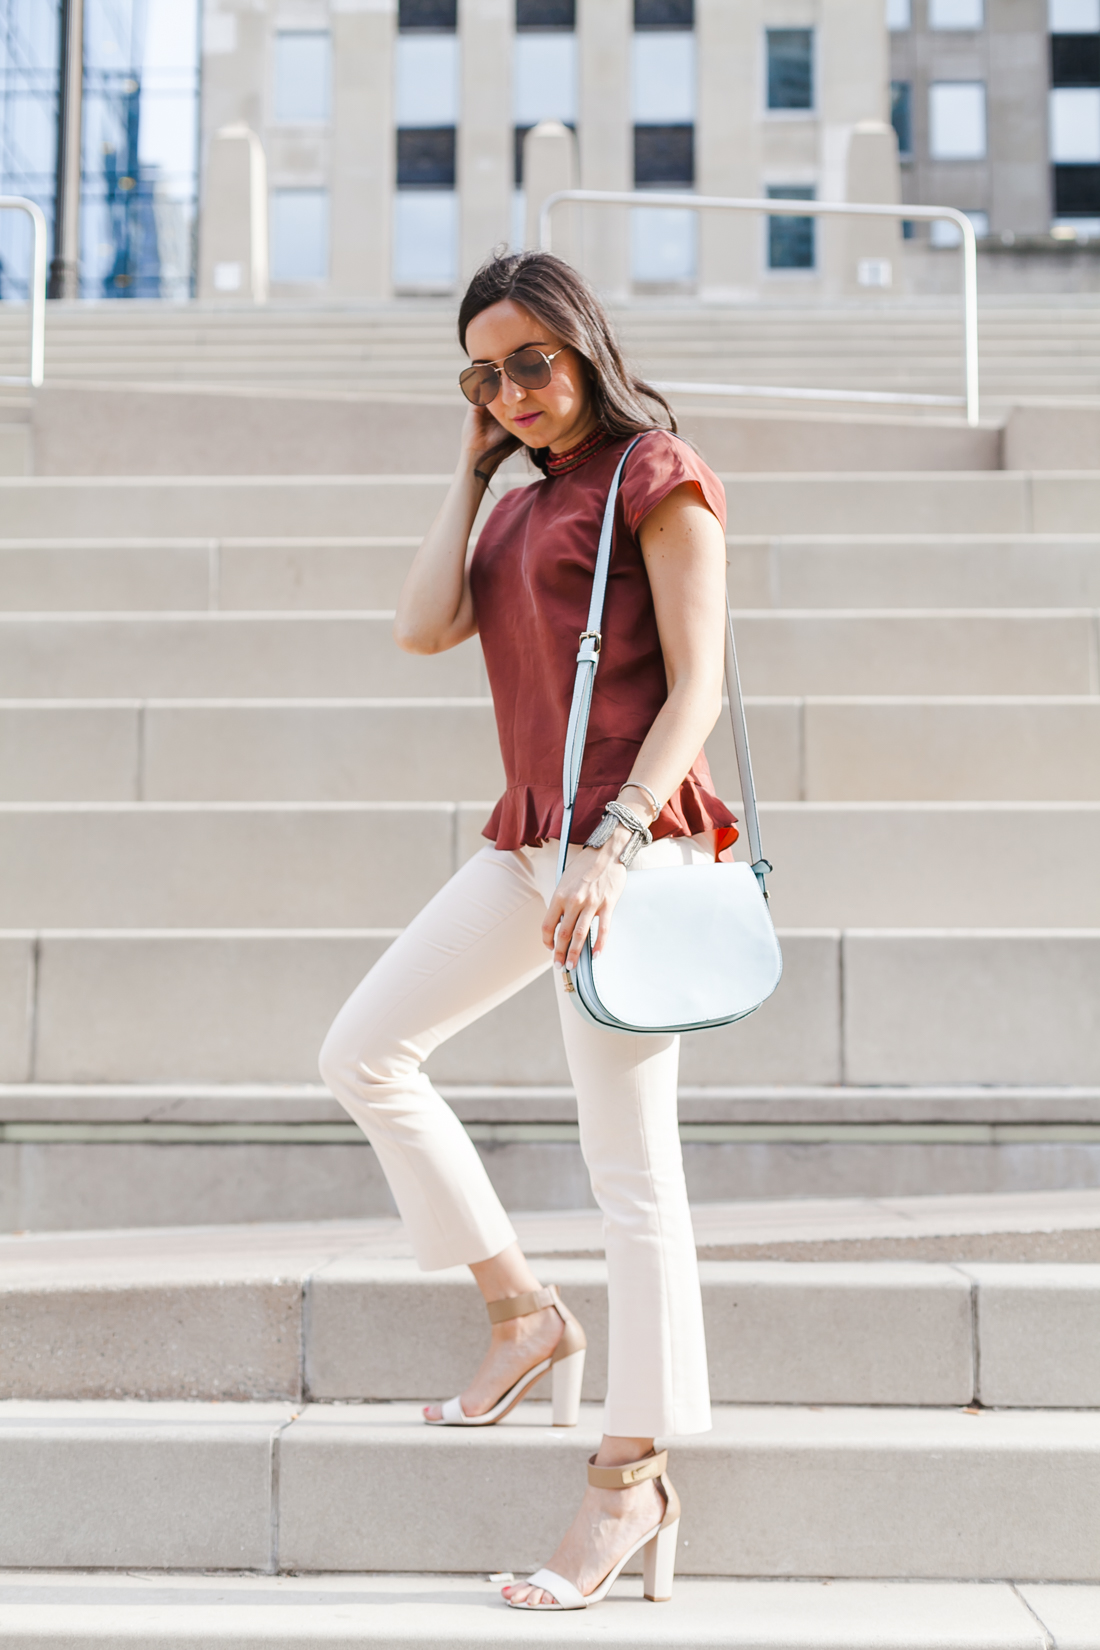 Nomad Luxuries Yana Puaca wearing a rust ruffled top and pink pants in chicago summer